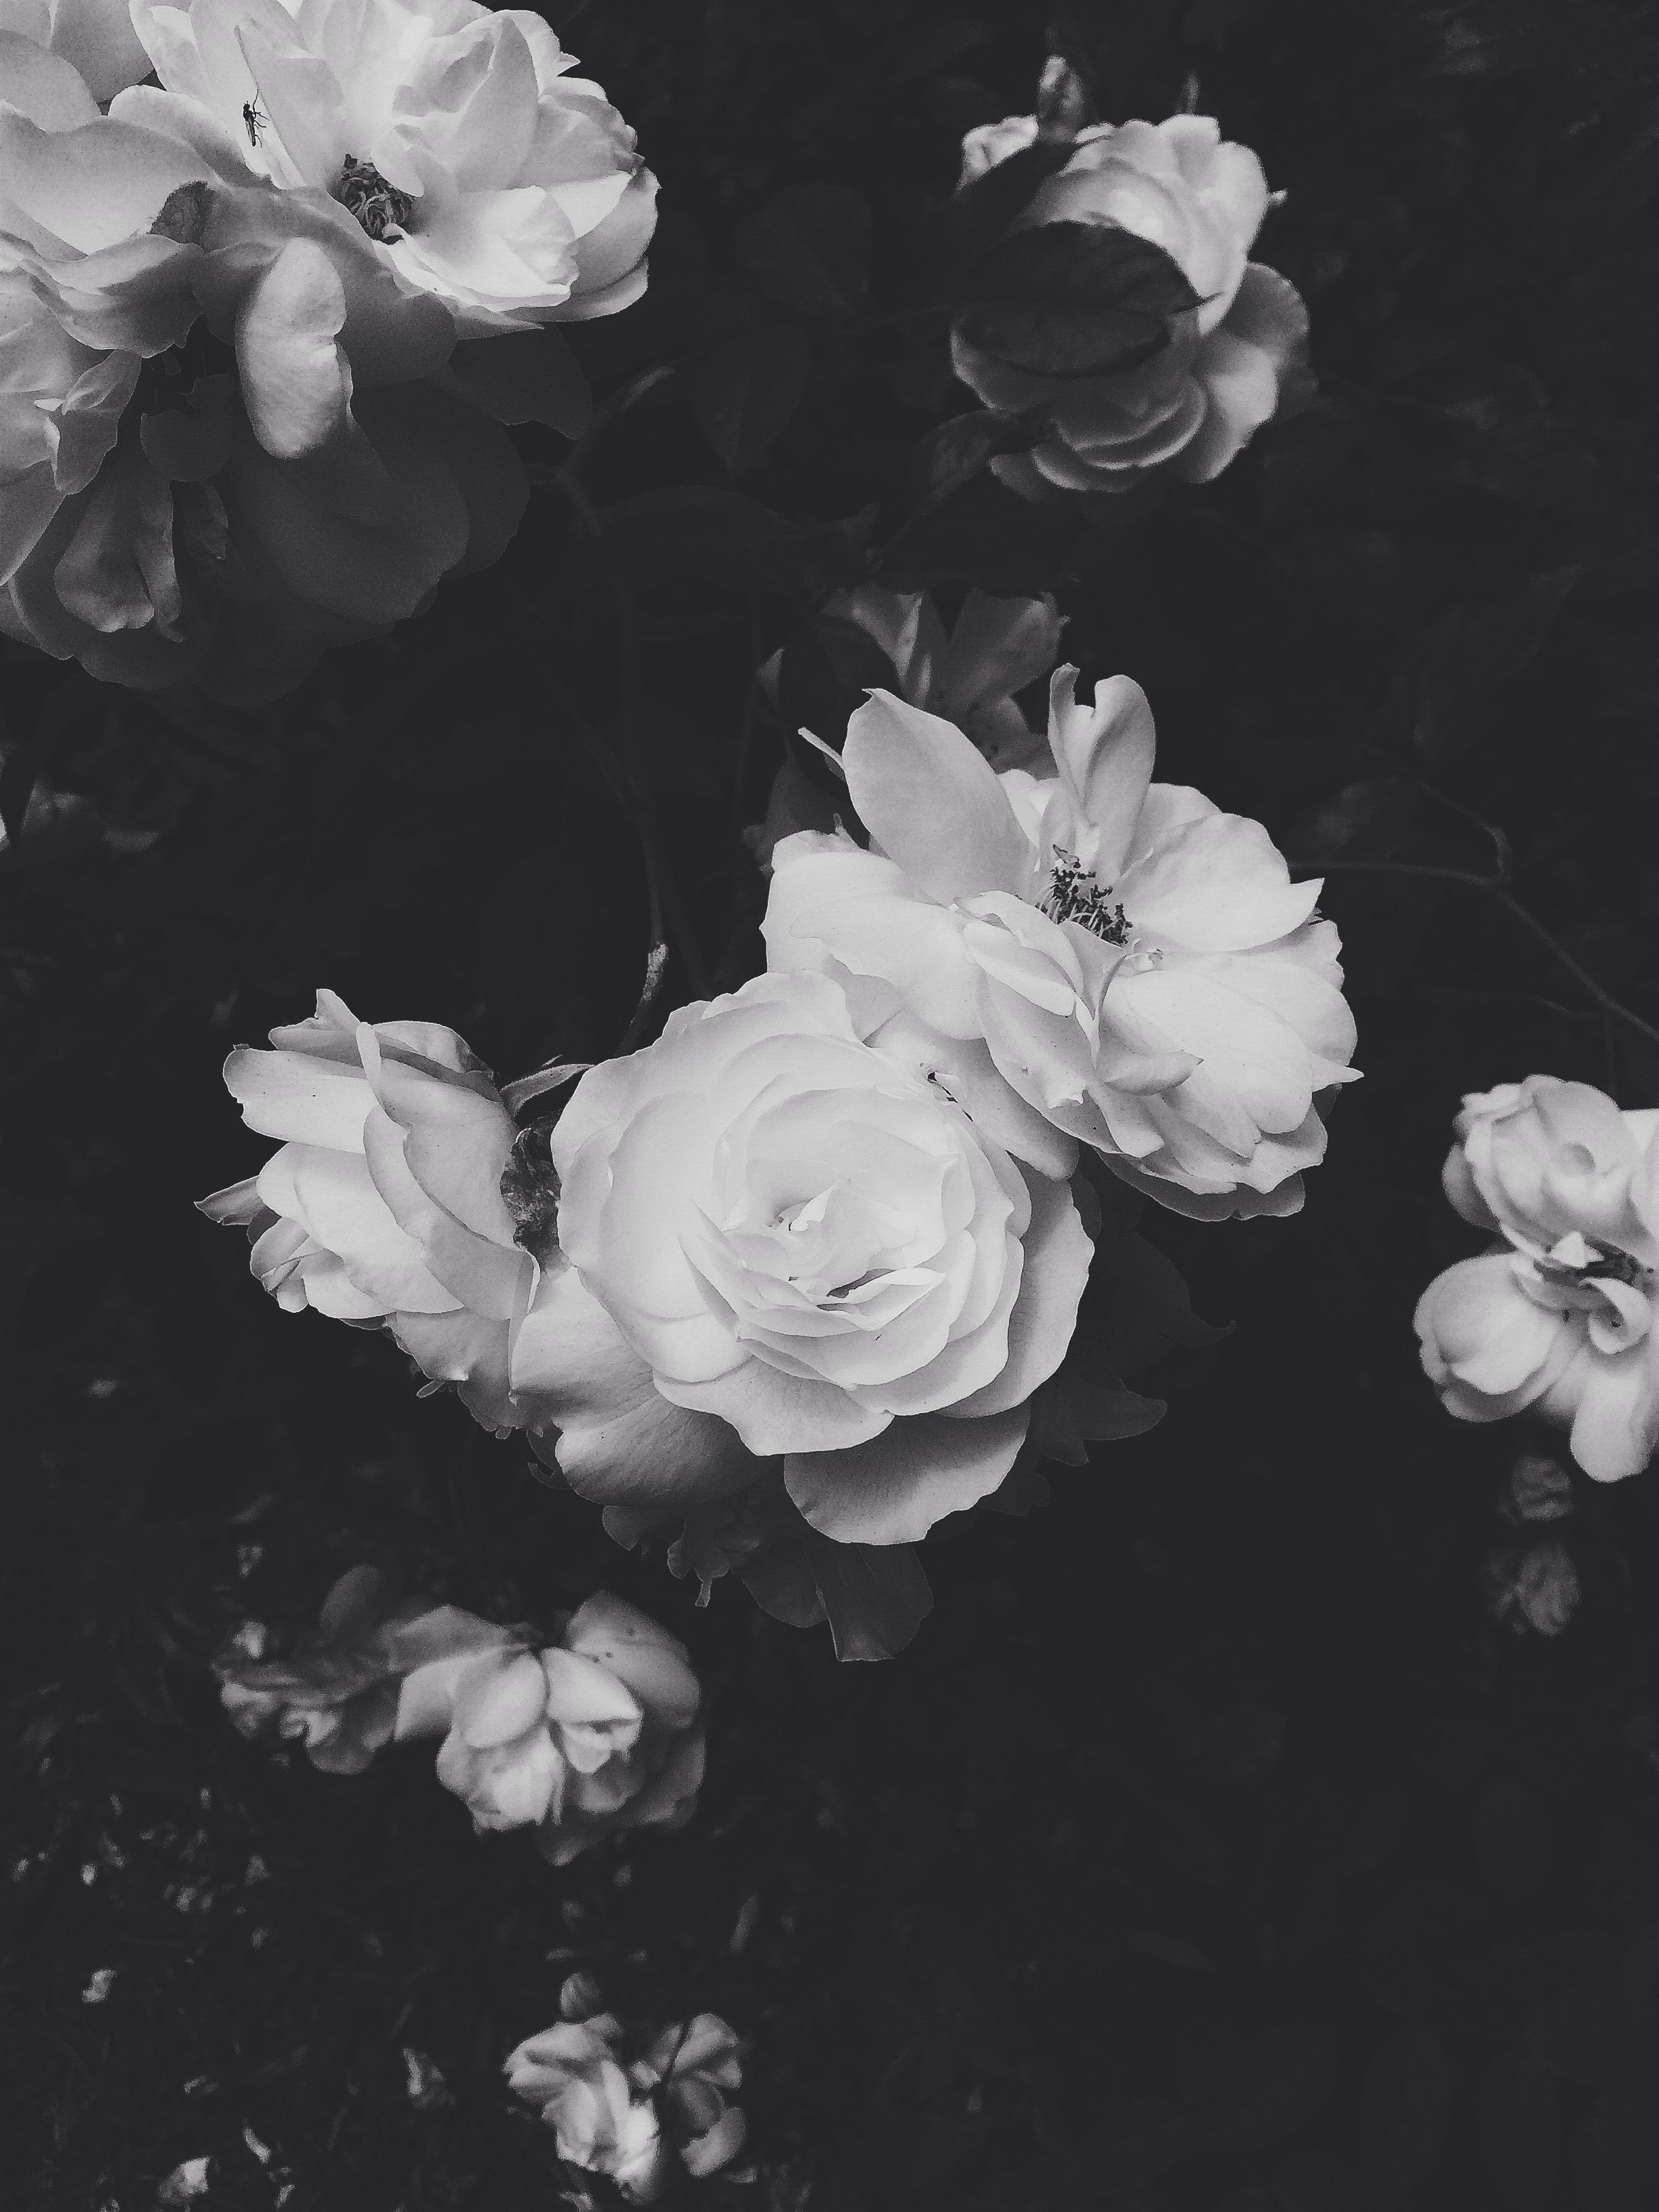 Black And White Aesthetic Roses Wallpapers - Wallpaper Cave